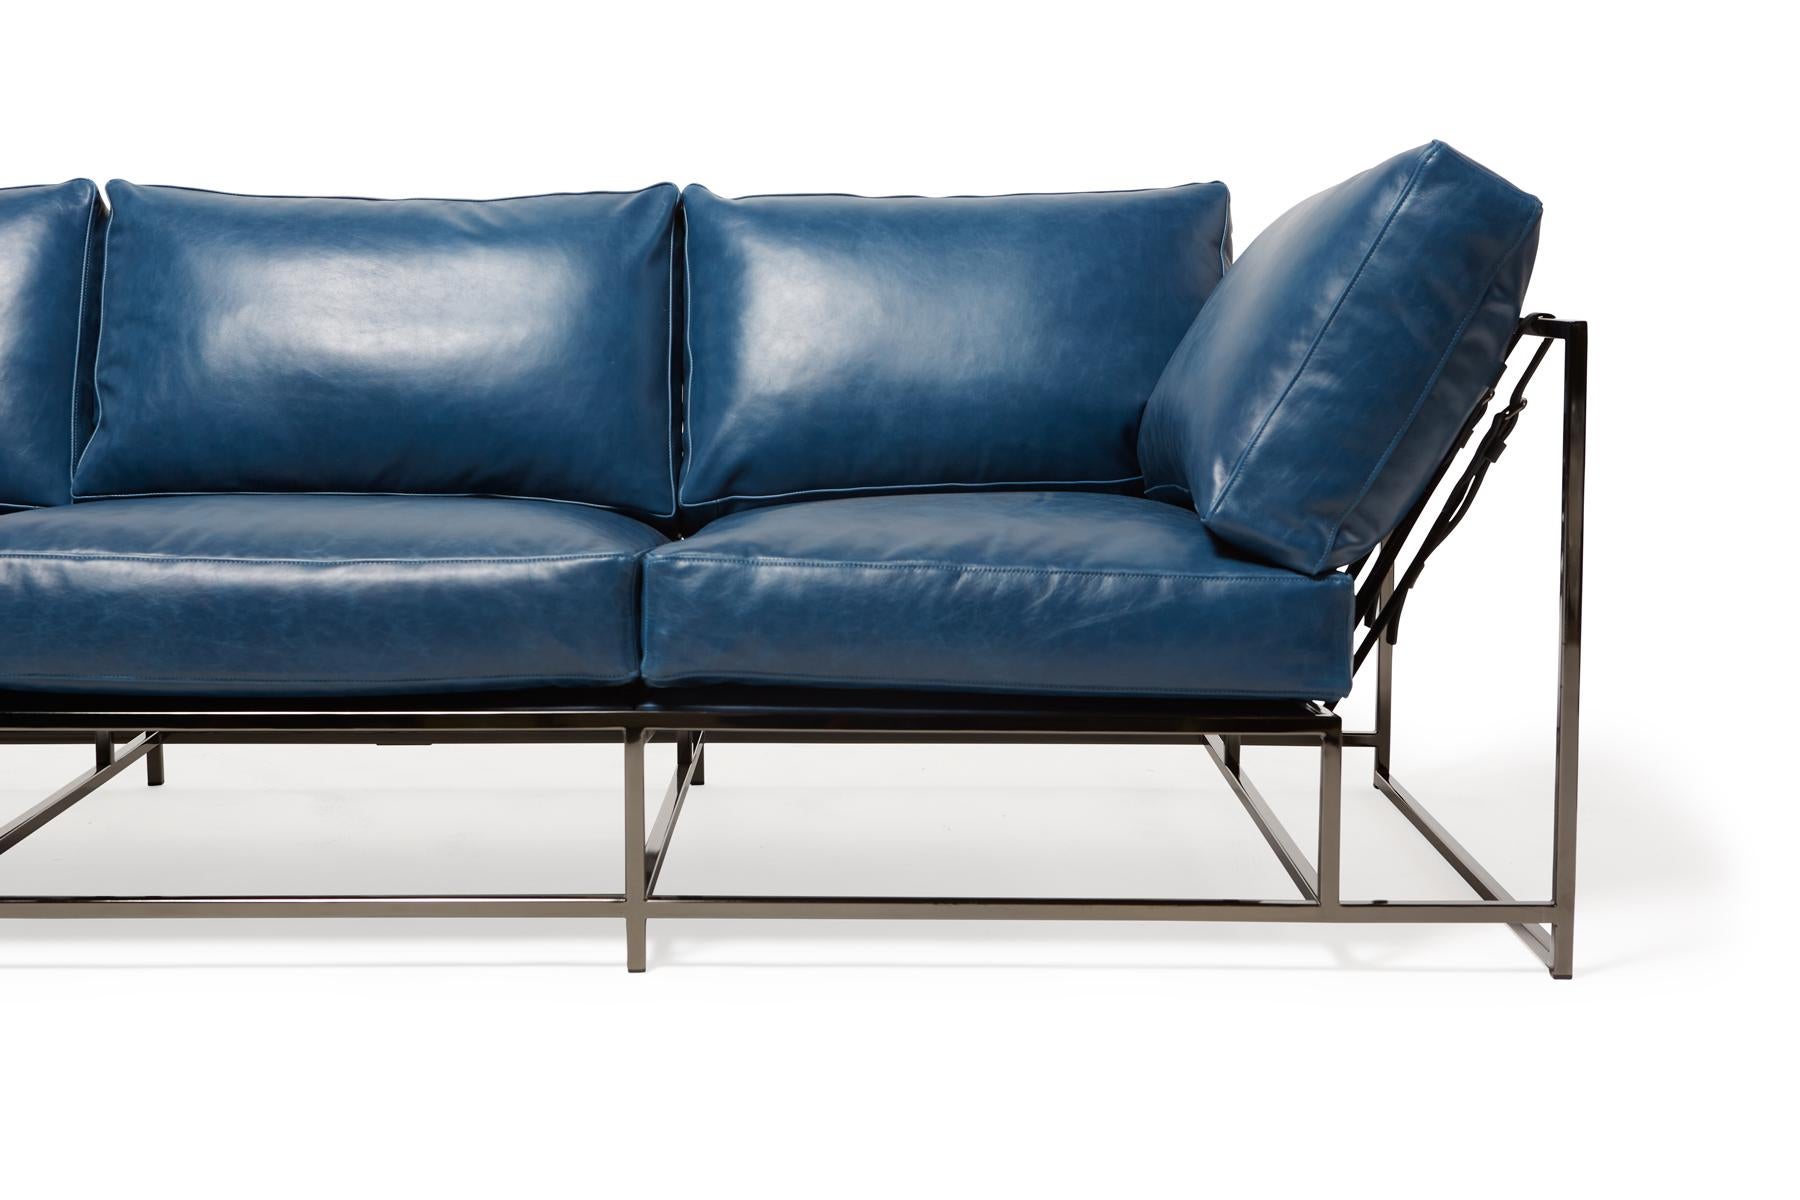 Metalwork Blue Leather and Polished Black Nickel Sofa For Sale